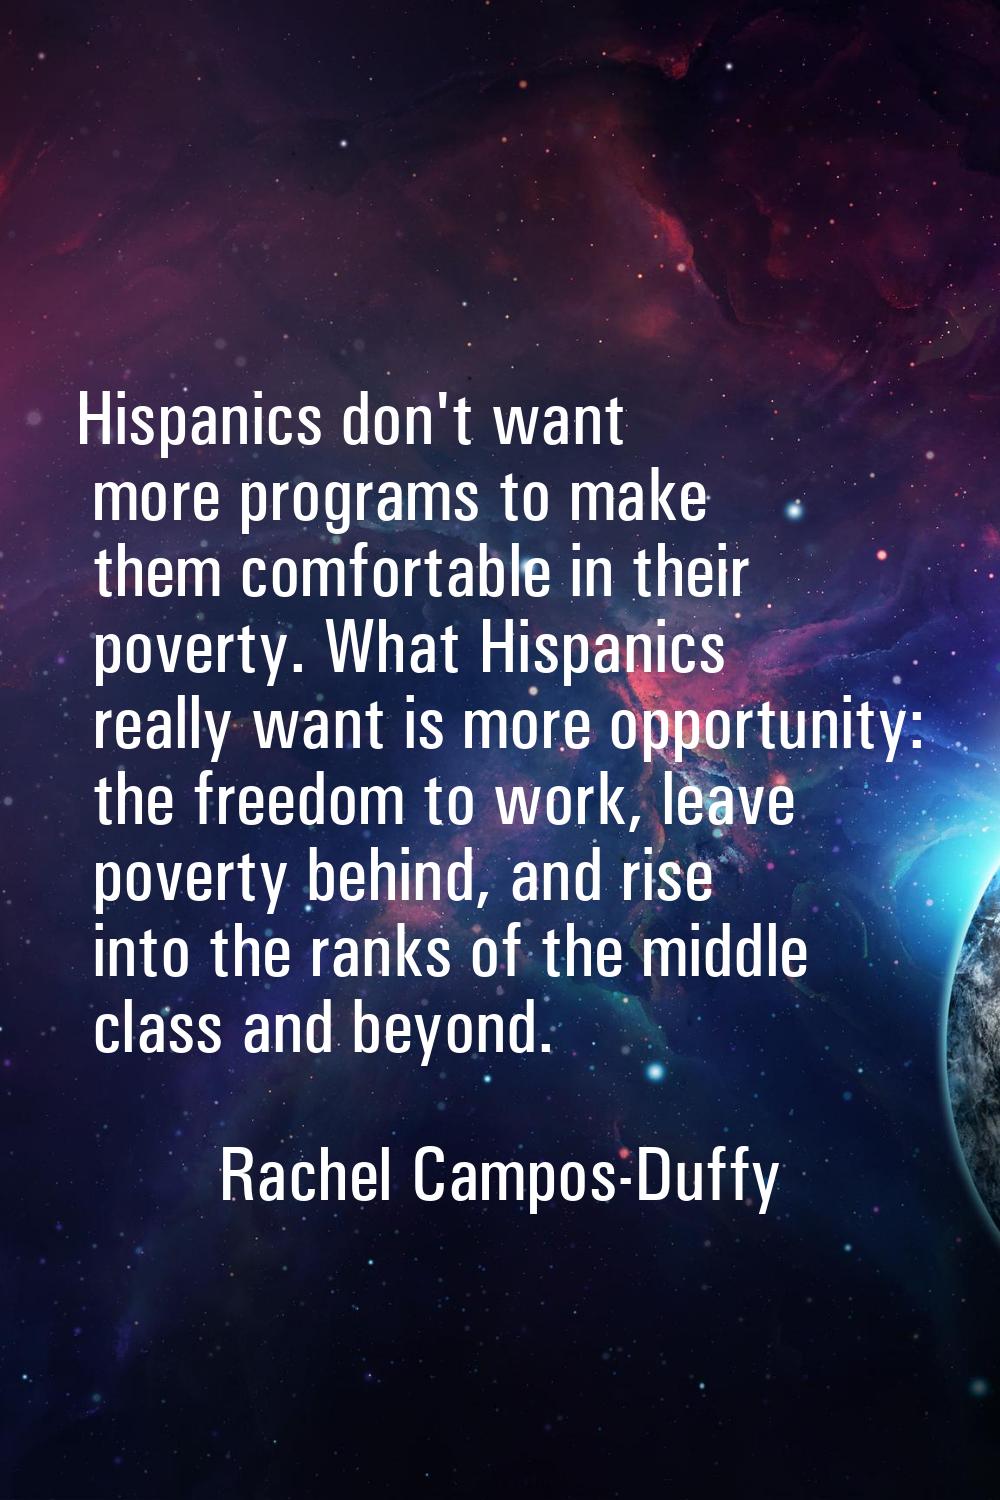 Hispanics don't want more programs to make them comfortable in their poverty. What Hispanics really